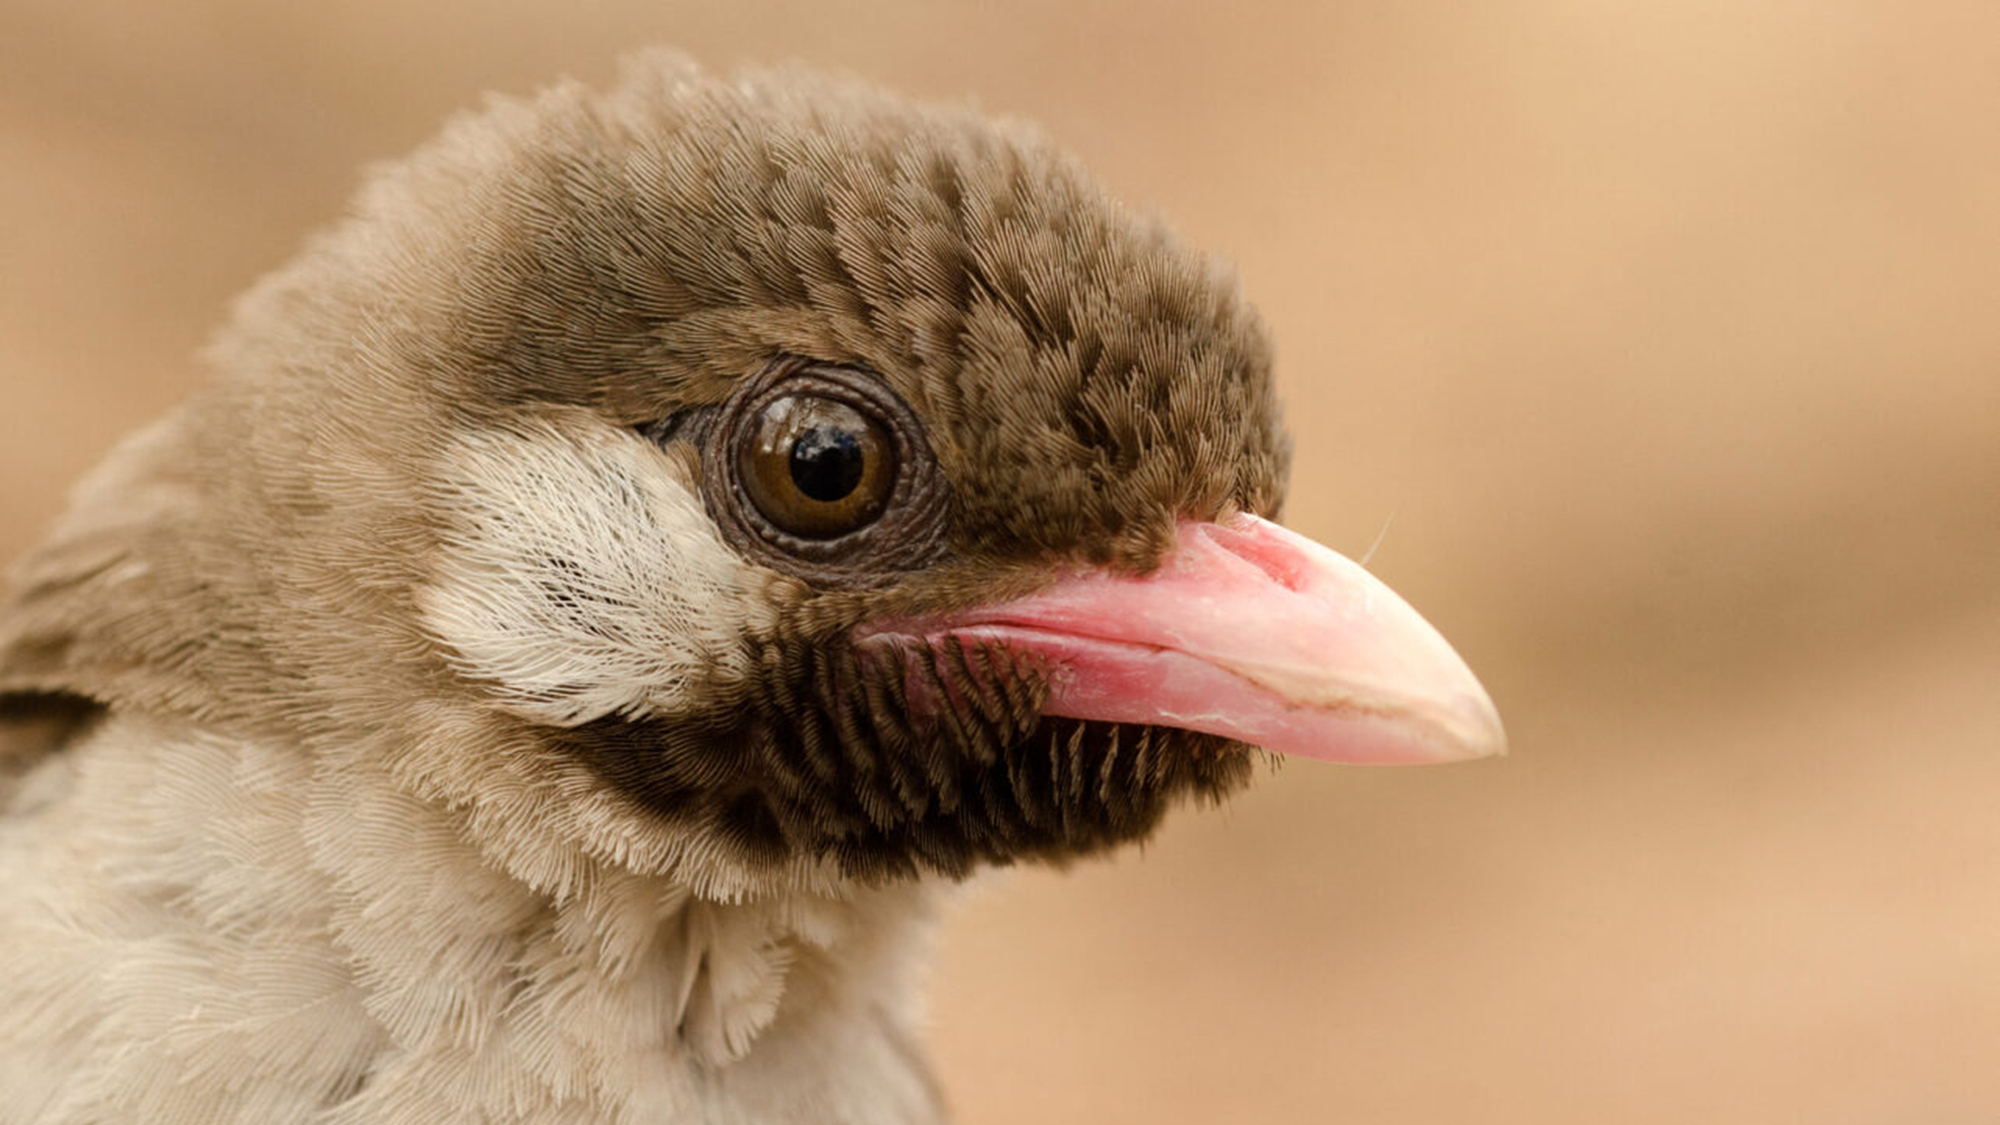 The greater honeyguide is a sub-Saharan bird that literally guides humans to sources of honey.